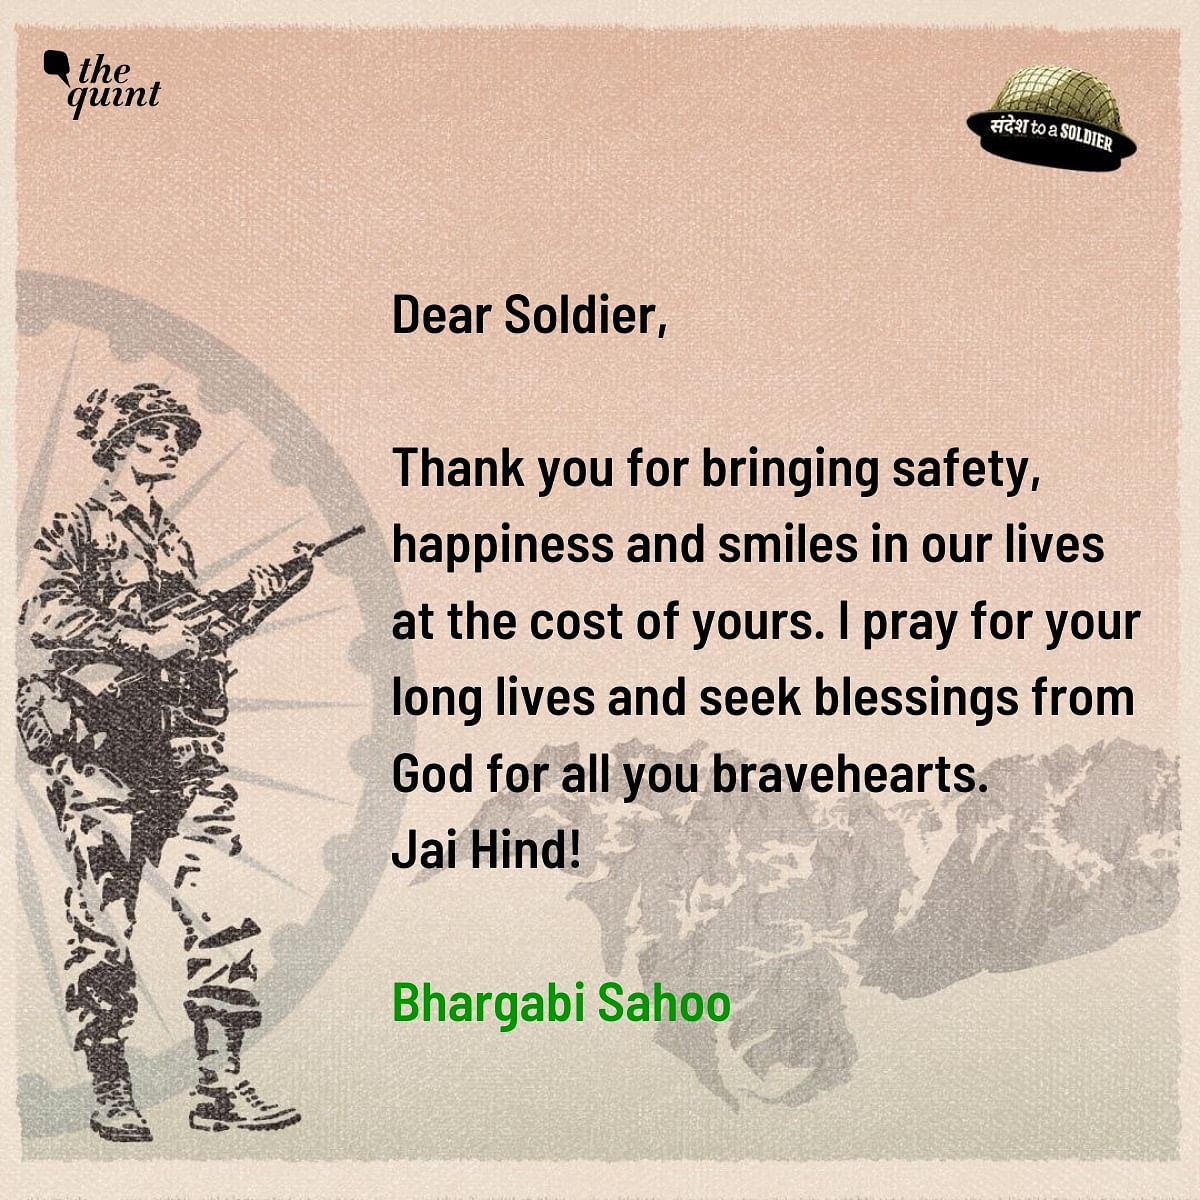 Citizens pen down their sandesh to a soldier, honouring their valour and selflessness.